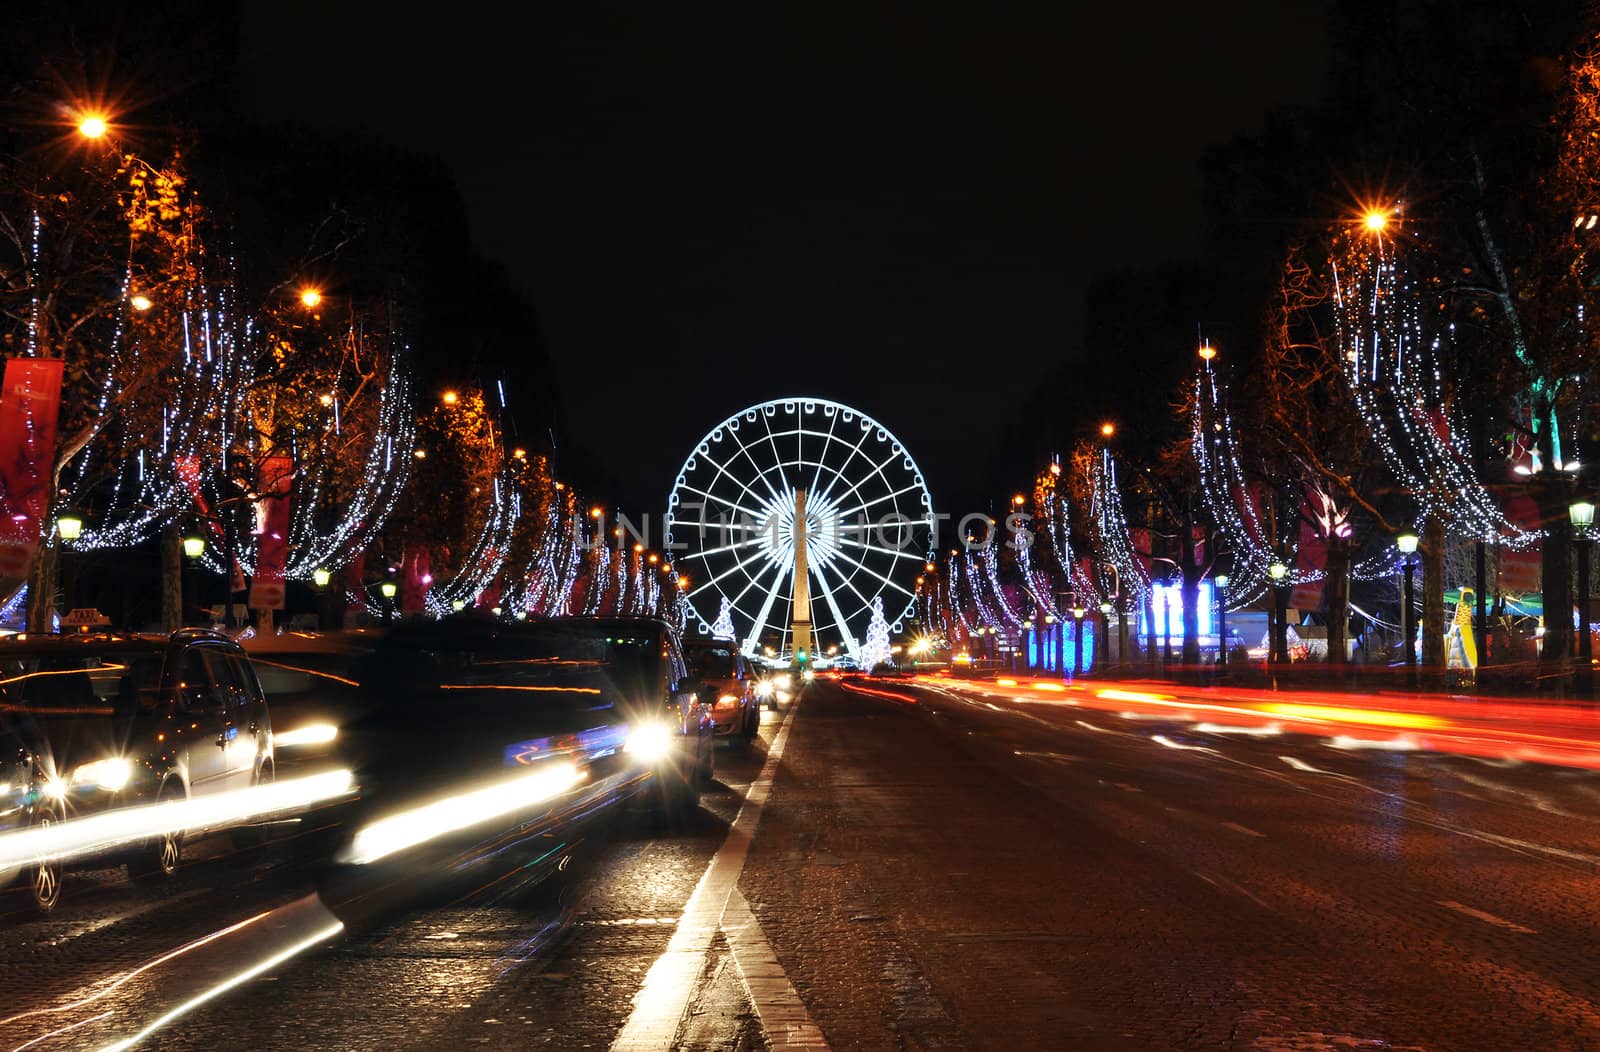 The Champs-Elysees avenue and the ferris wheel on Concorde Square illuminated for Christmas